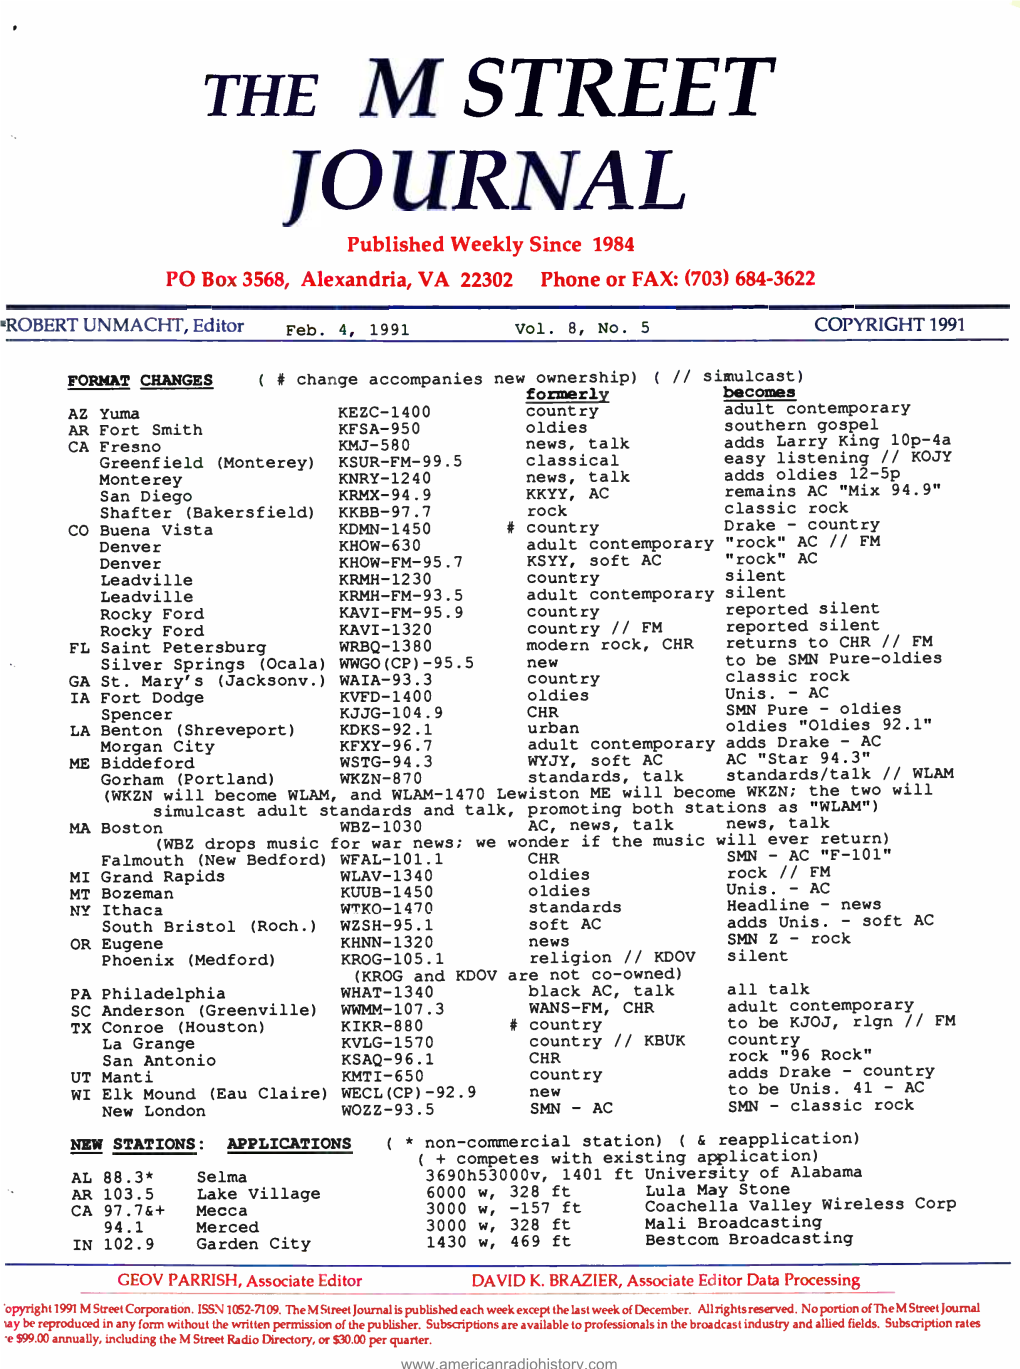 JOURNAL Published Weekly Since 1984 PO Box 3568, Alexandria, VA 22302 Phone Or FAX: (703) 684-3622